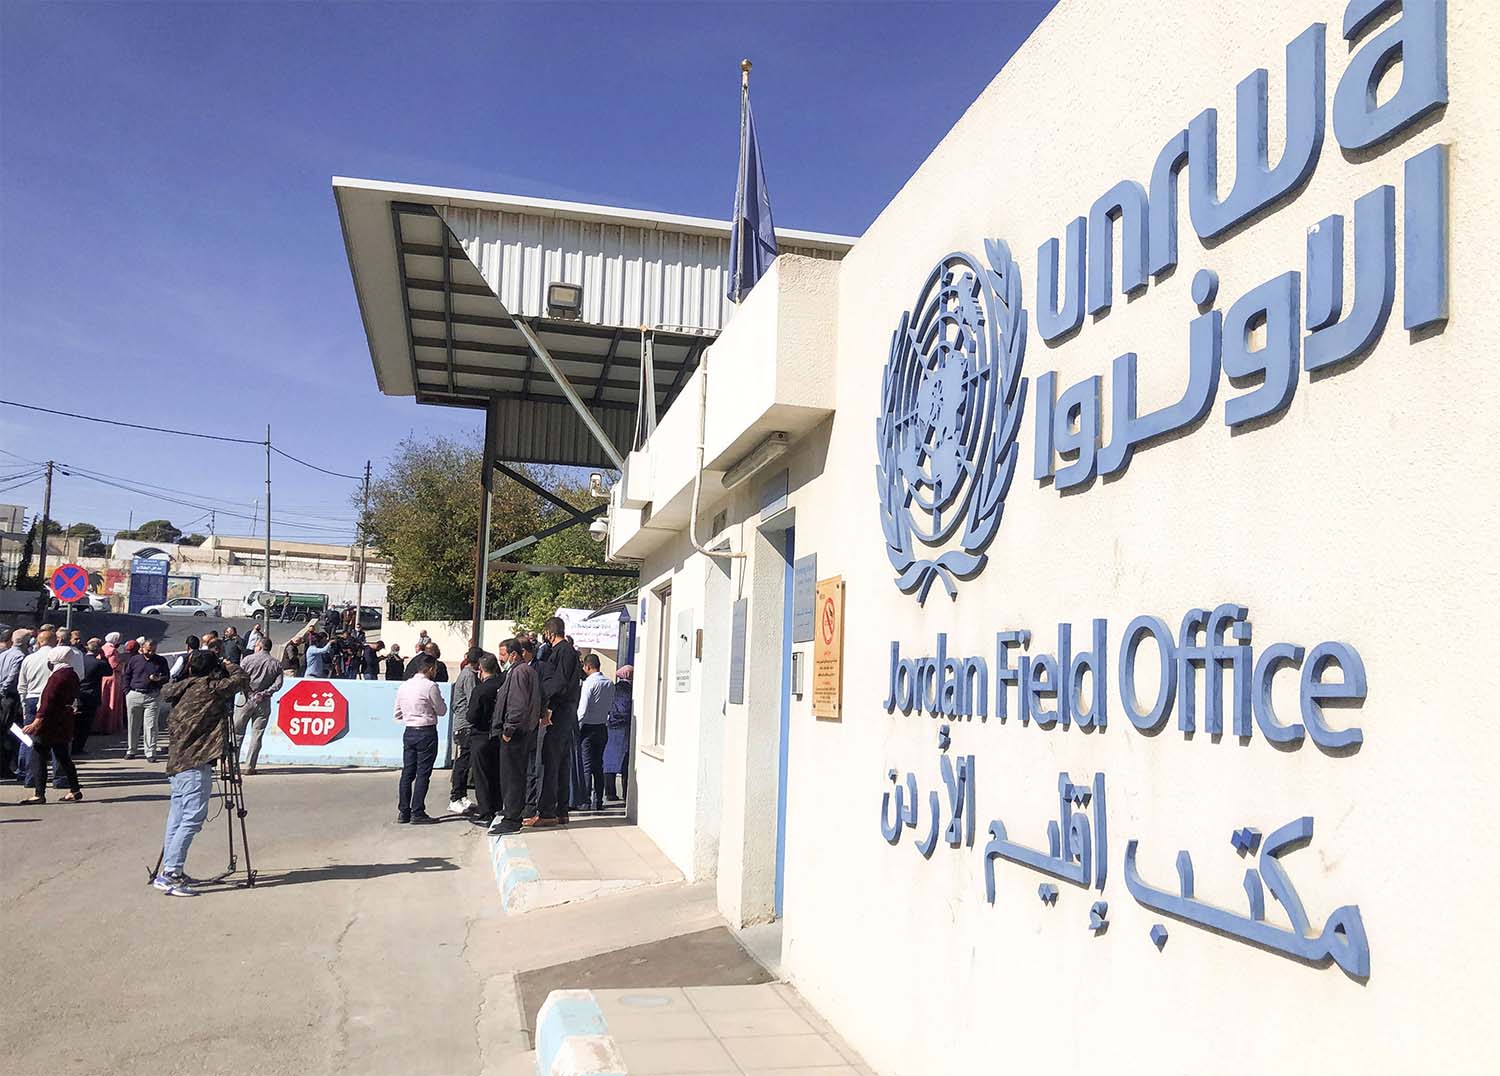 UNRWA runs schools, clinics and food distribution programs for millions of registered Palestinian refugees across the Middle East